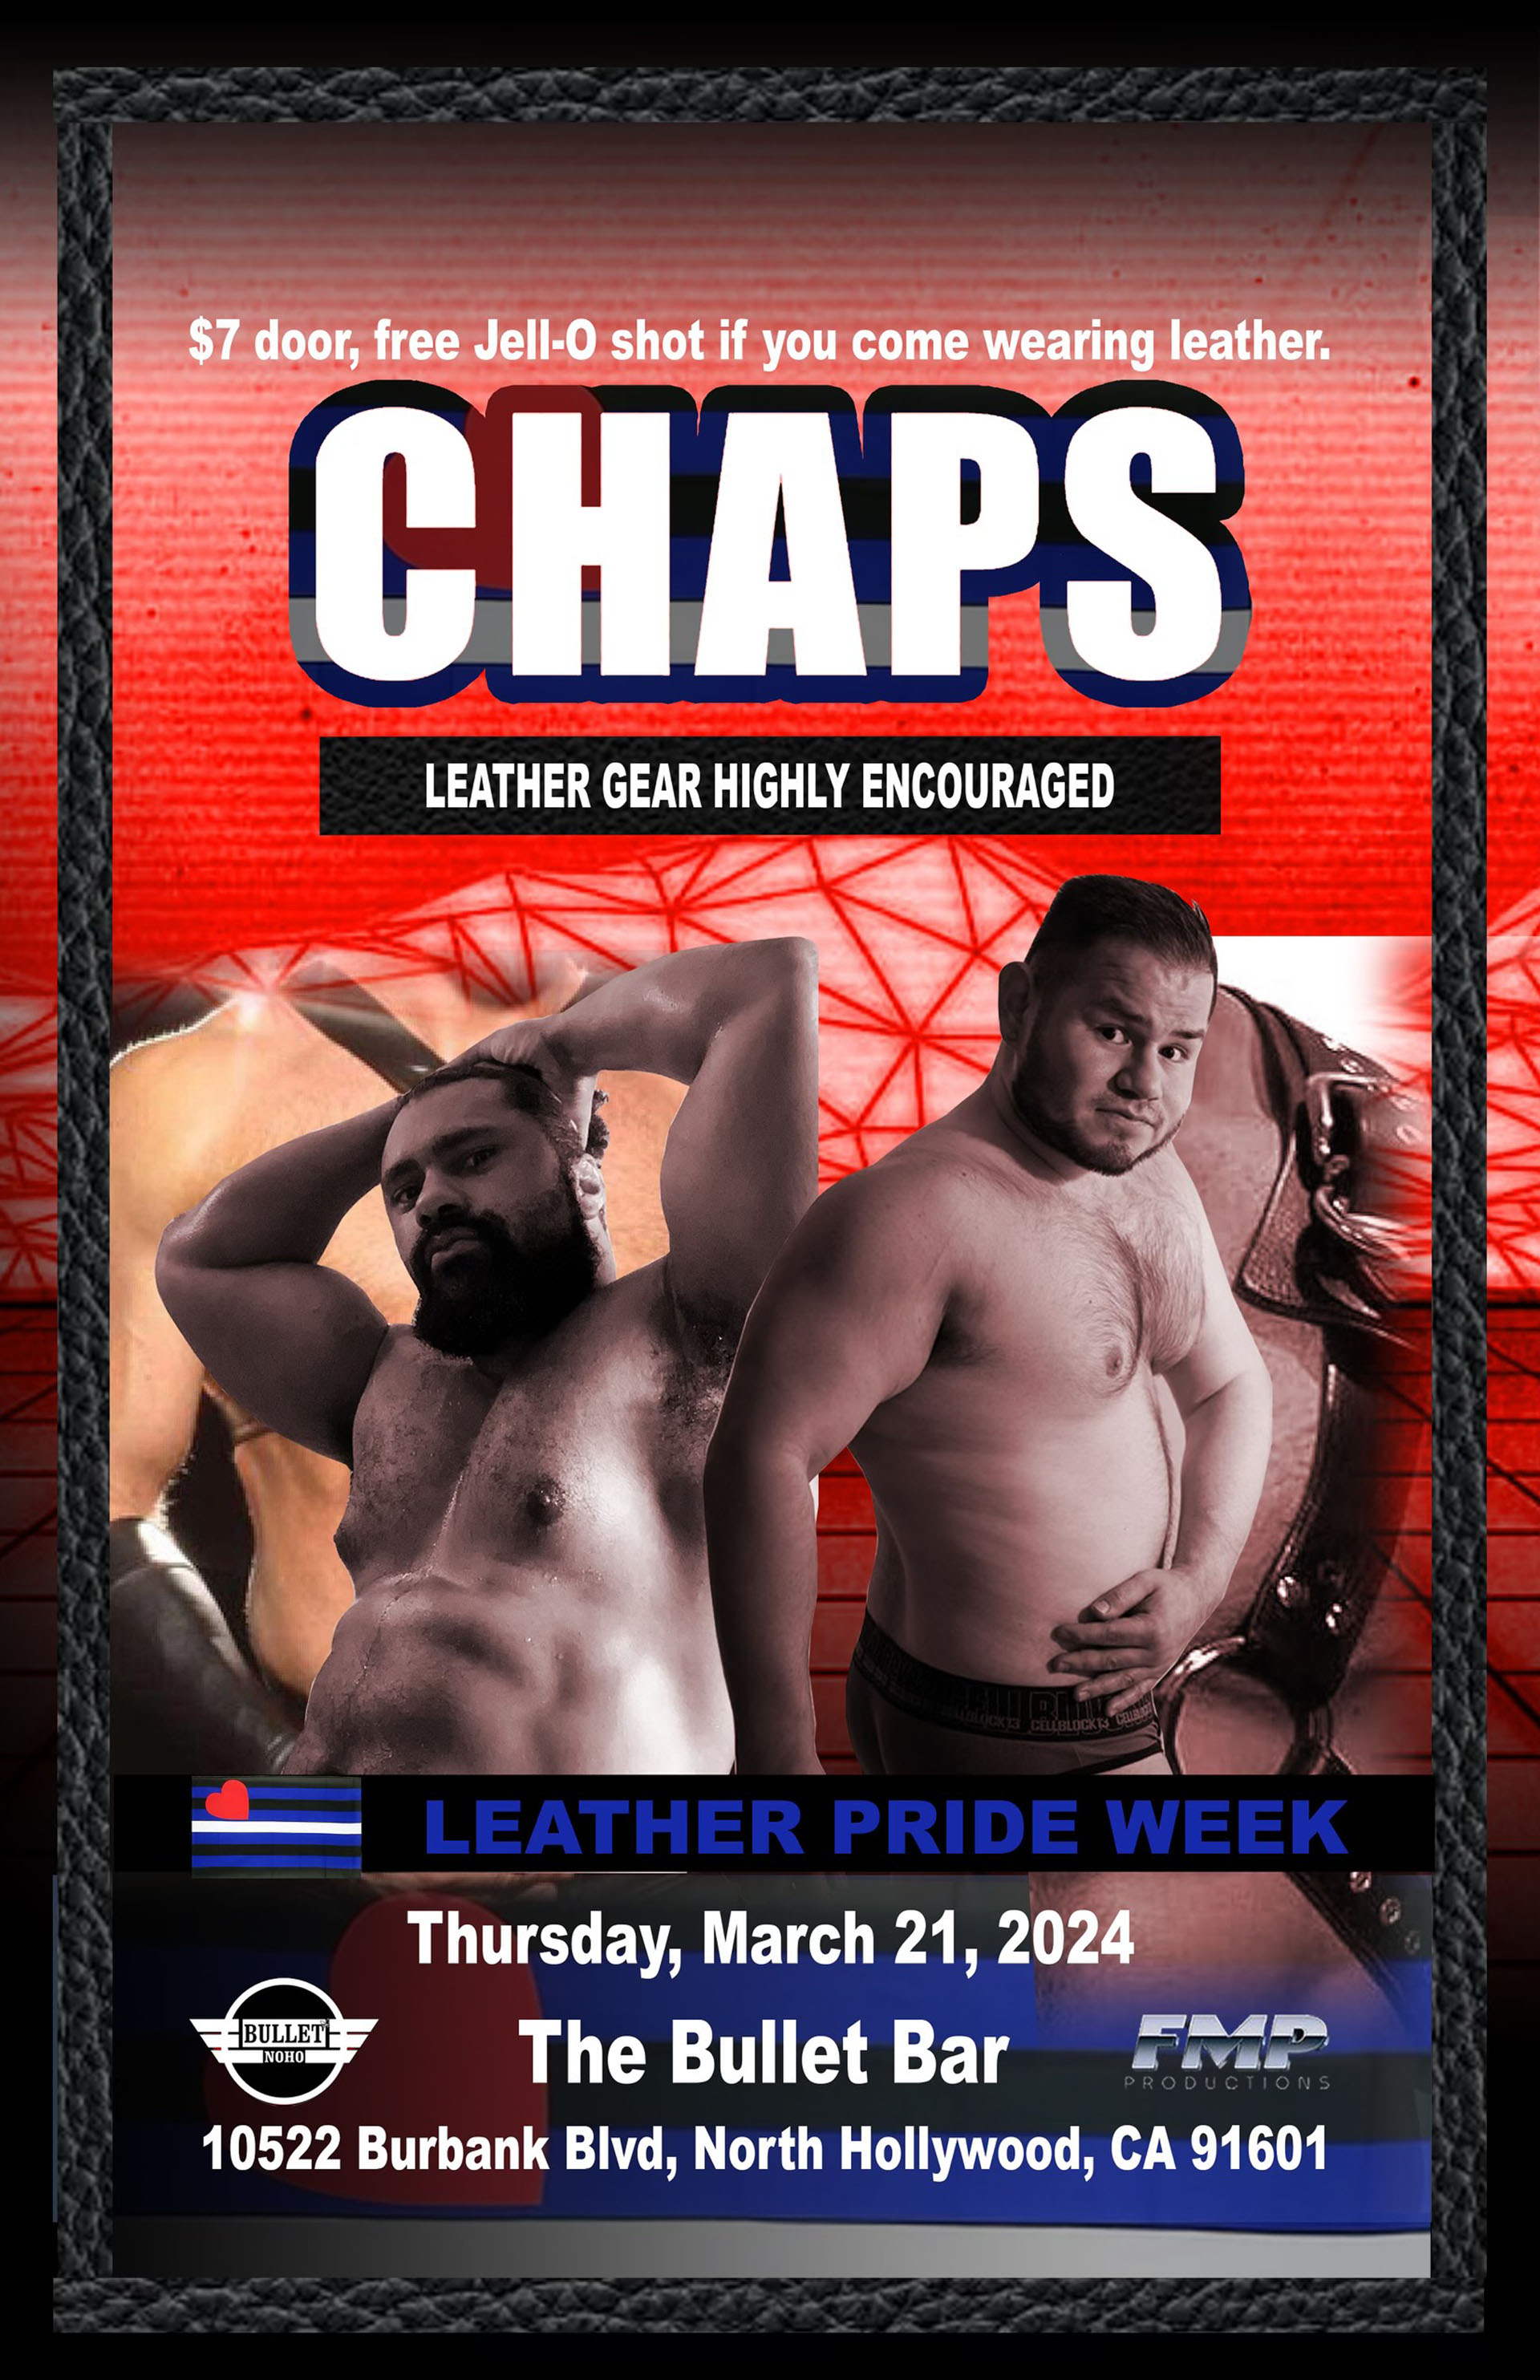 THE BULLET BAR and FMP PRODUCTIONS Present CHAPS: Thursday, 03/21/24 from 9:00 PM to 2:00 AM! $7 door cover with FREE JELL-O SHOT, if you come waring leather.